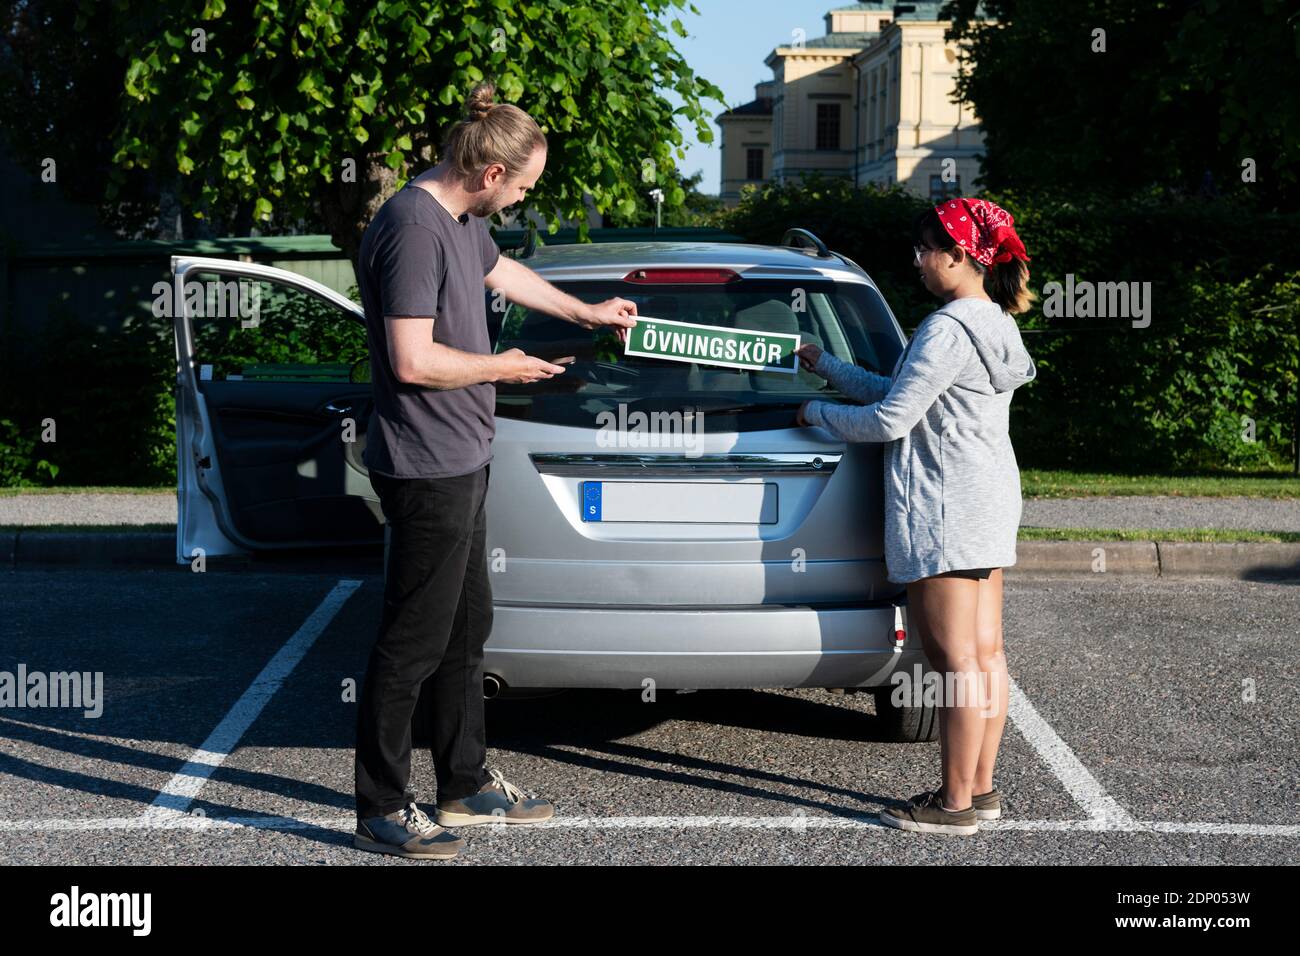 Man and woman putting learning plate on car Stock Photo